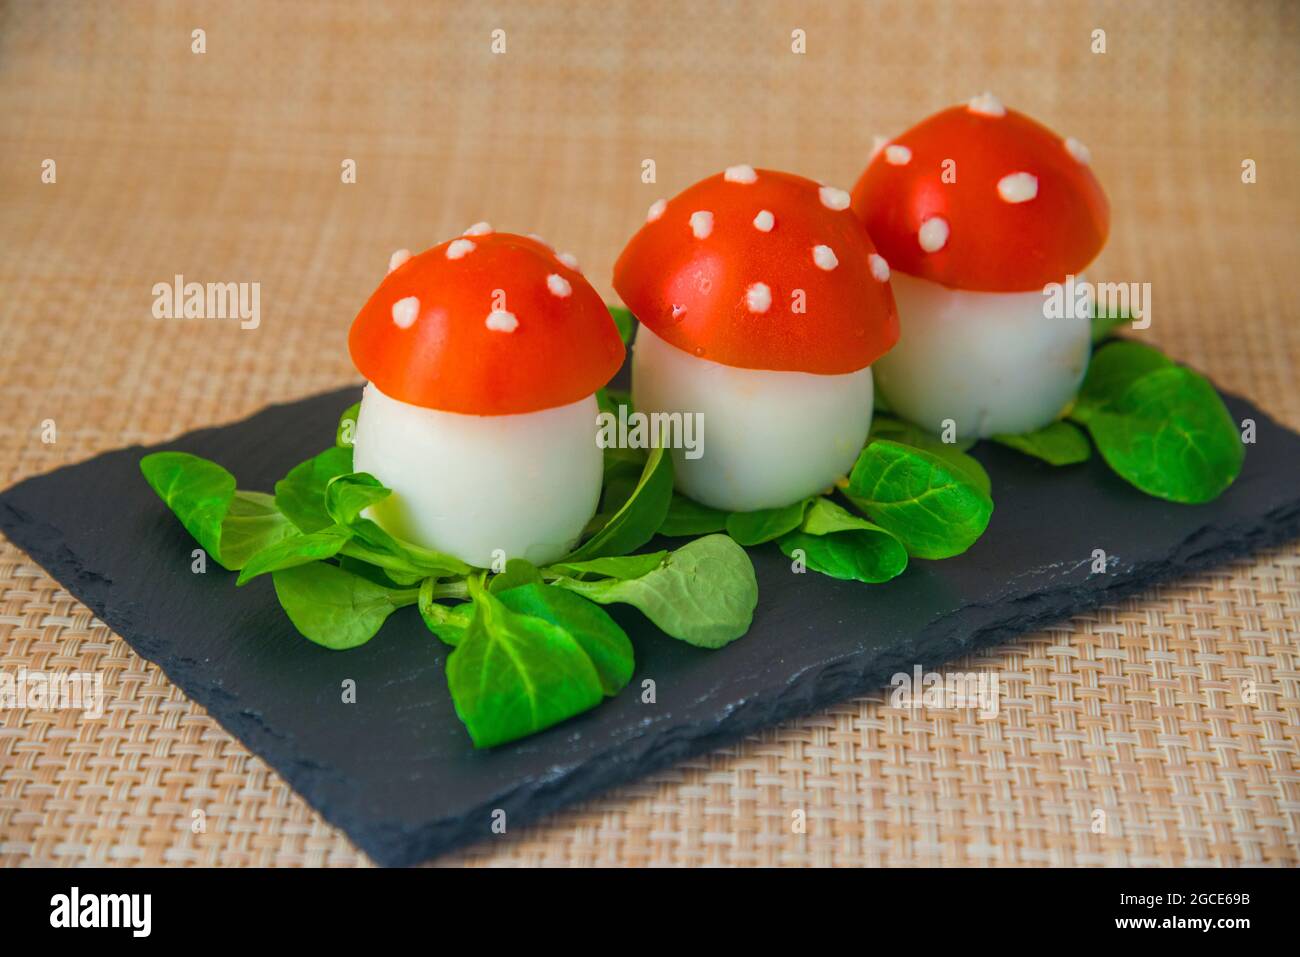 Pinchos made of boiled egg and tomato as mushrooms. Spain. Stock Photo